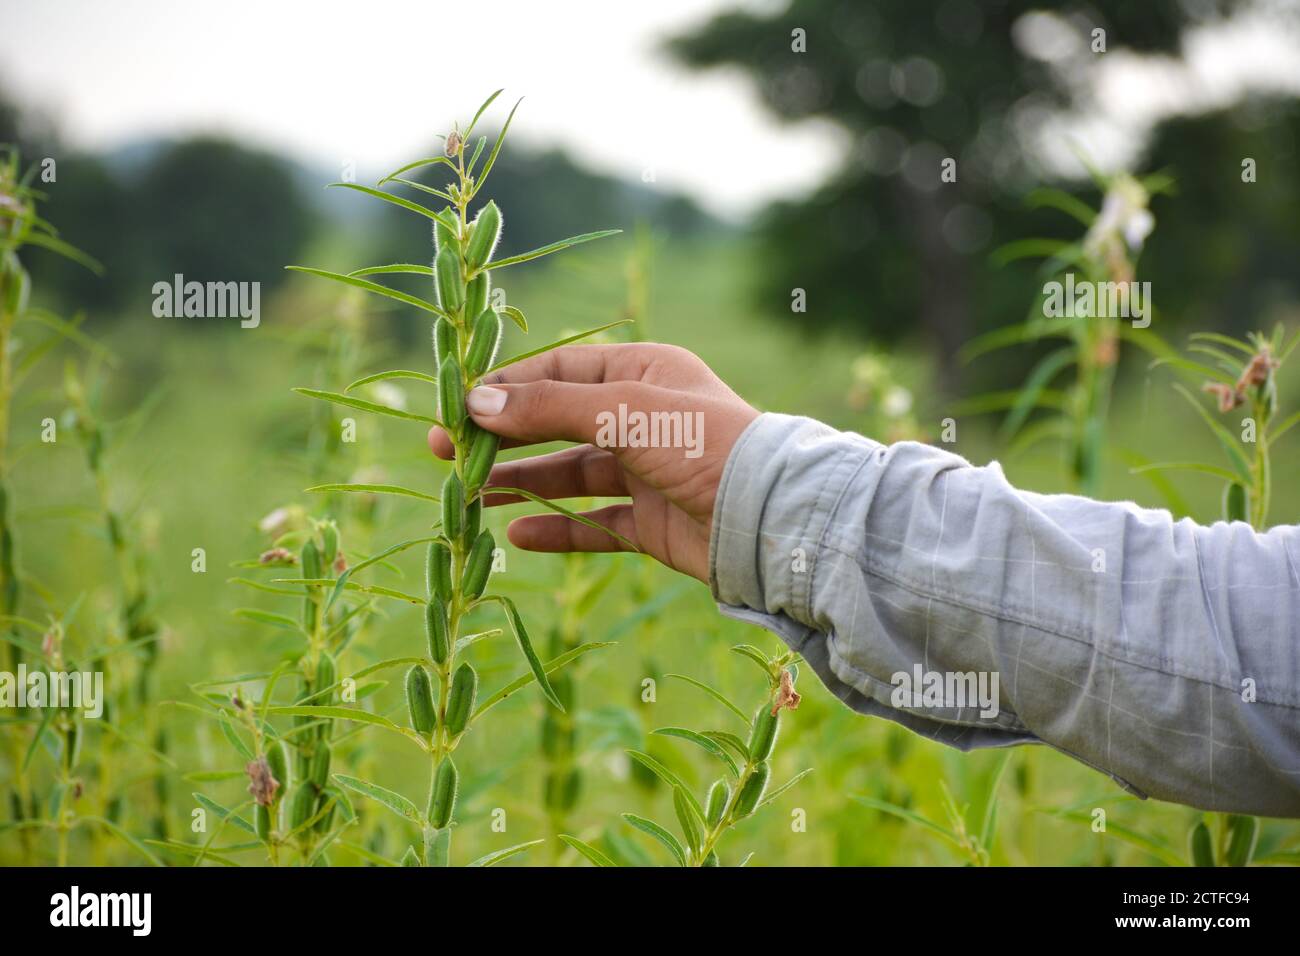 Male hand holding sesame plant against the background of a sesame field Stock Photo